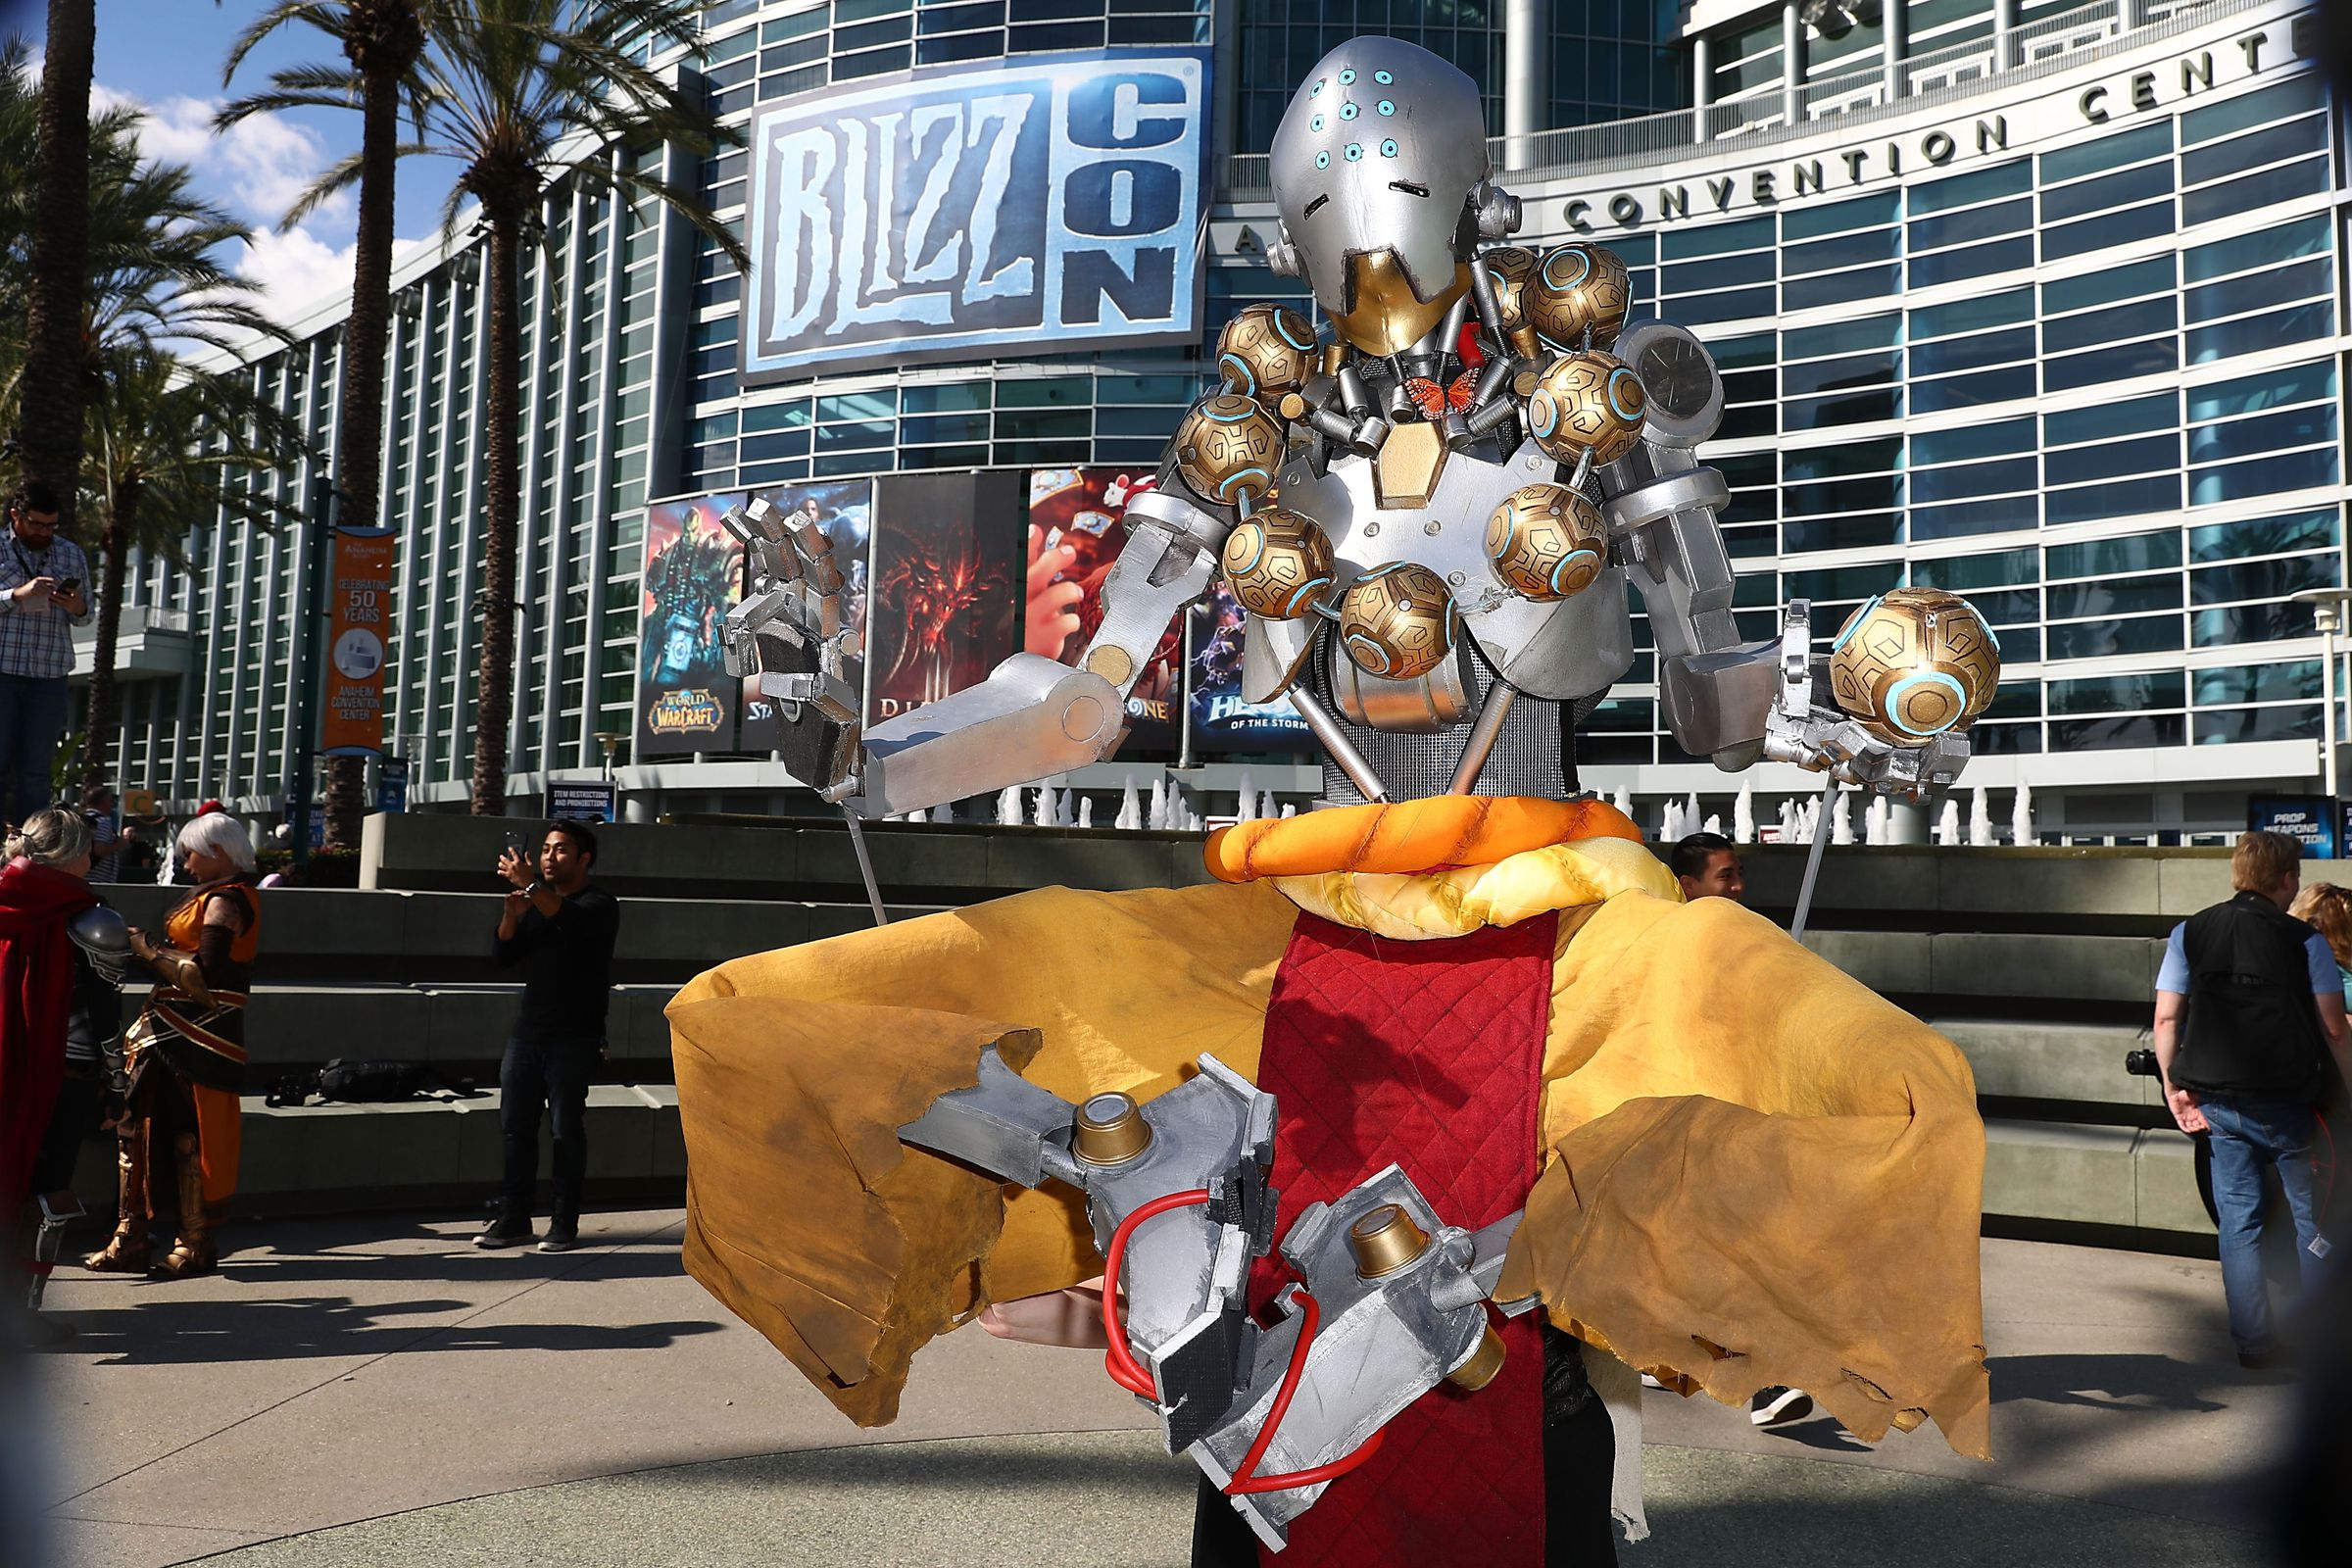 A cosplayer poses for a photo at BlizzCon 2017 at Anaheim Convention Center on November 3, 2017 in Anaheim, California. BlizzCon is the site of the Overwatch World Cup 2017 eSports tournament.